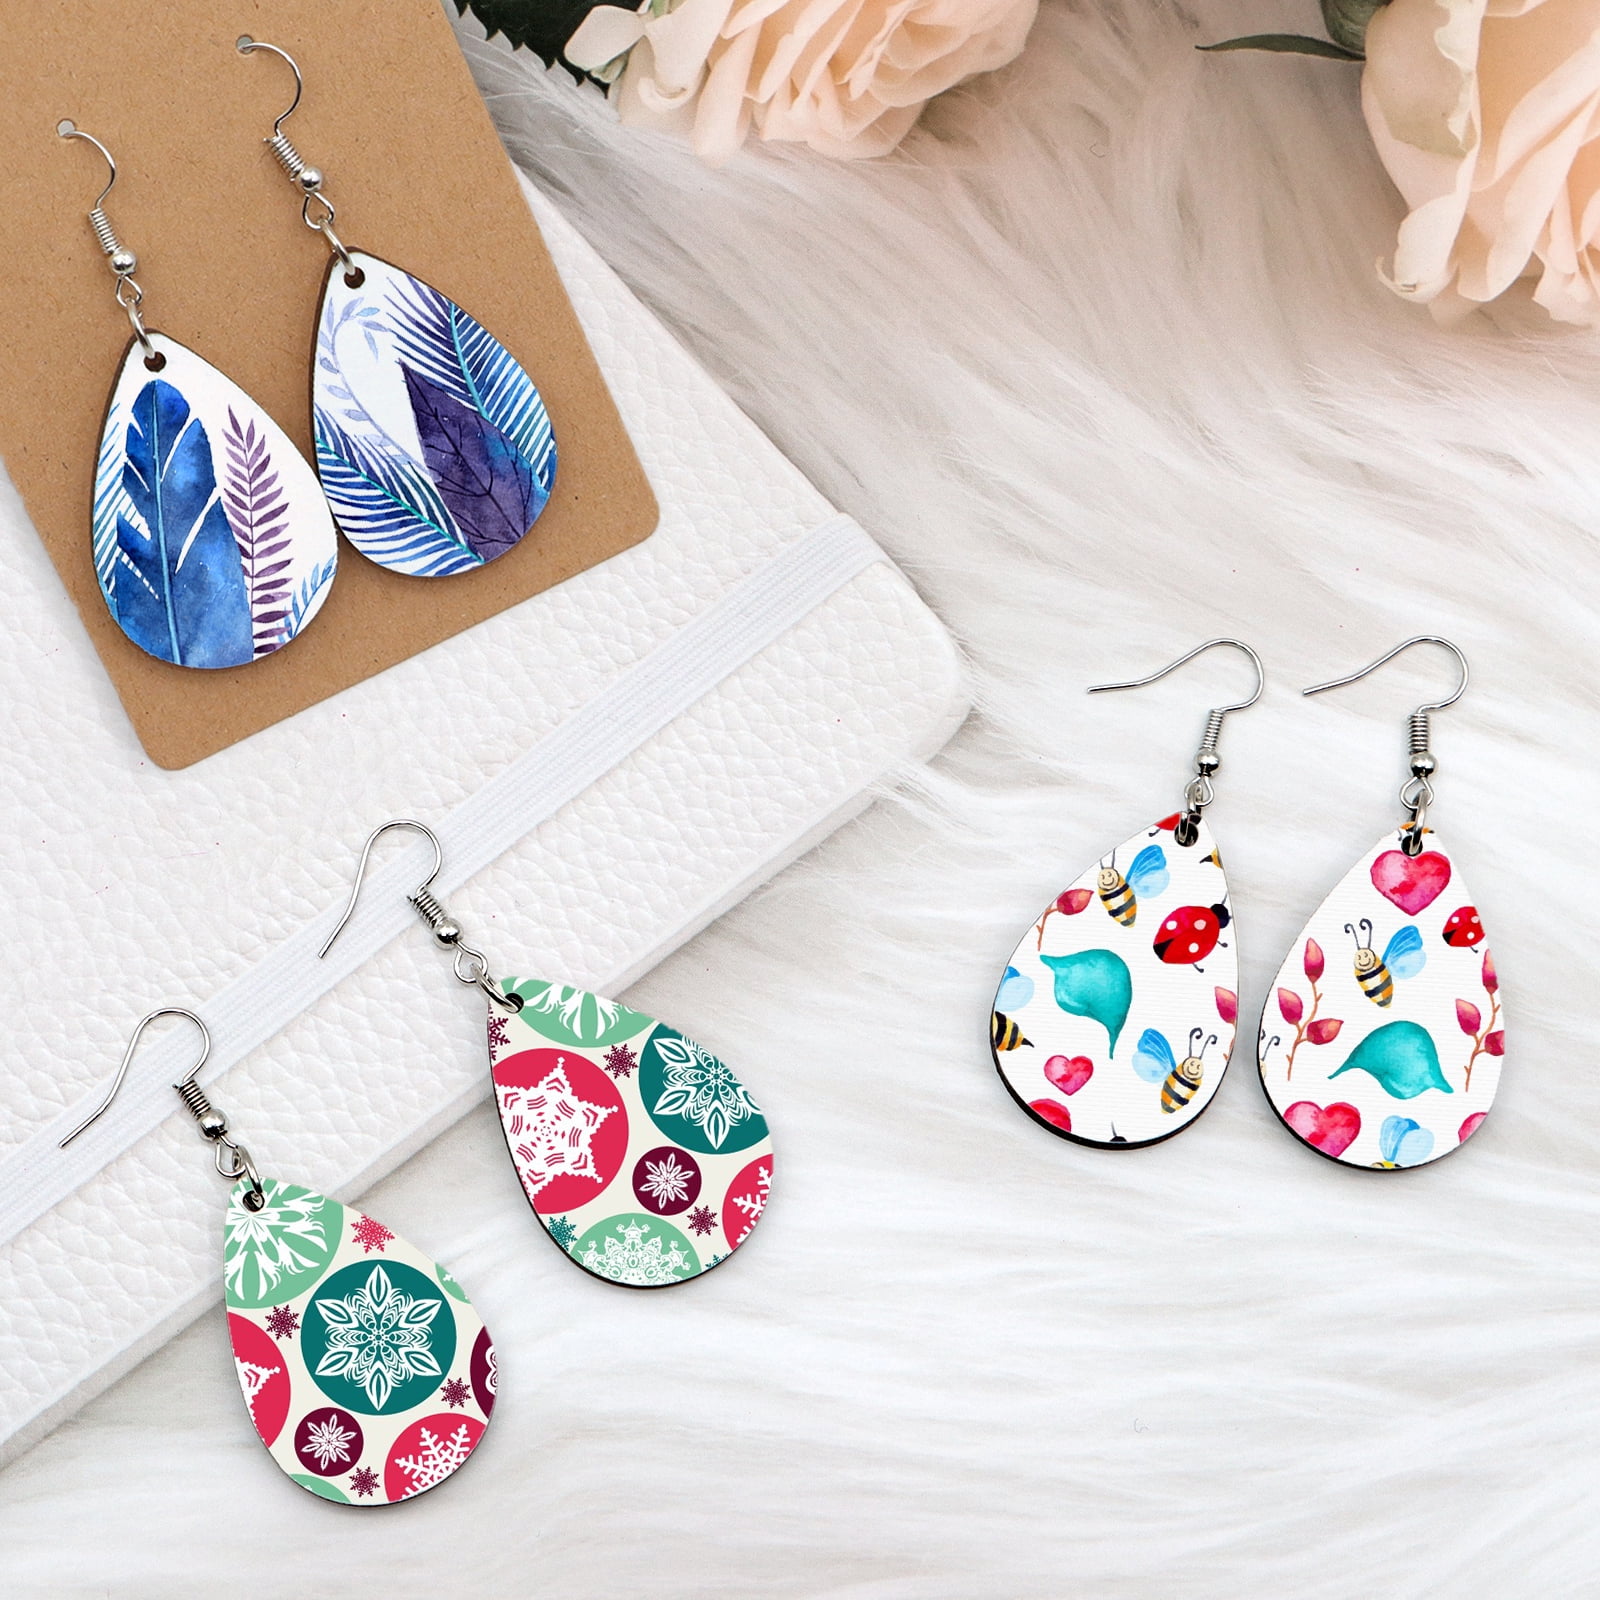 Sublimation Blanks Buy Earrings Online Cheap Blank Sublimation Buy Earrings  Online Cheap Party Gift DIY Valentines Day Gifts For Women Designer Buy  Earrings Online Cheap HHXD24352 From Seals168, $0.86